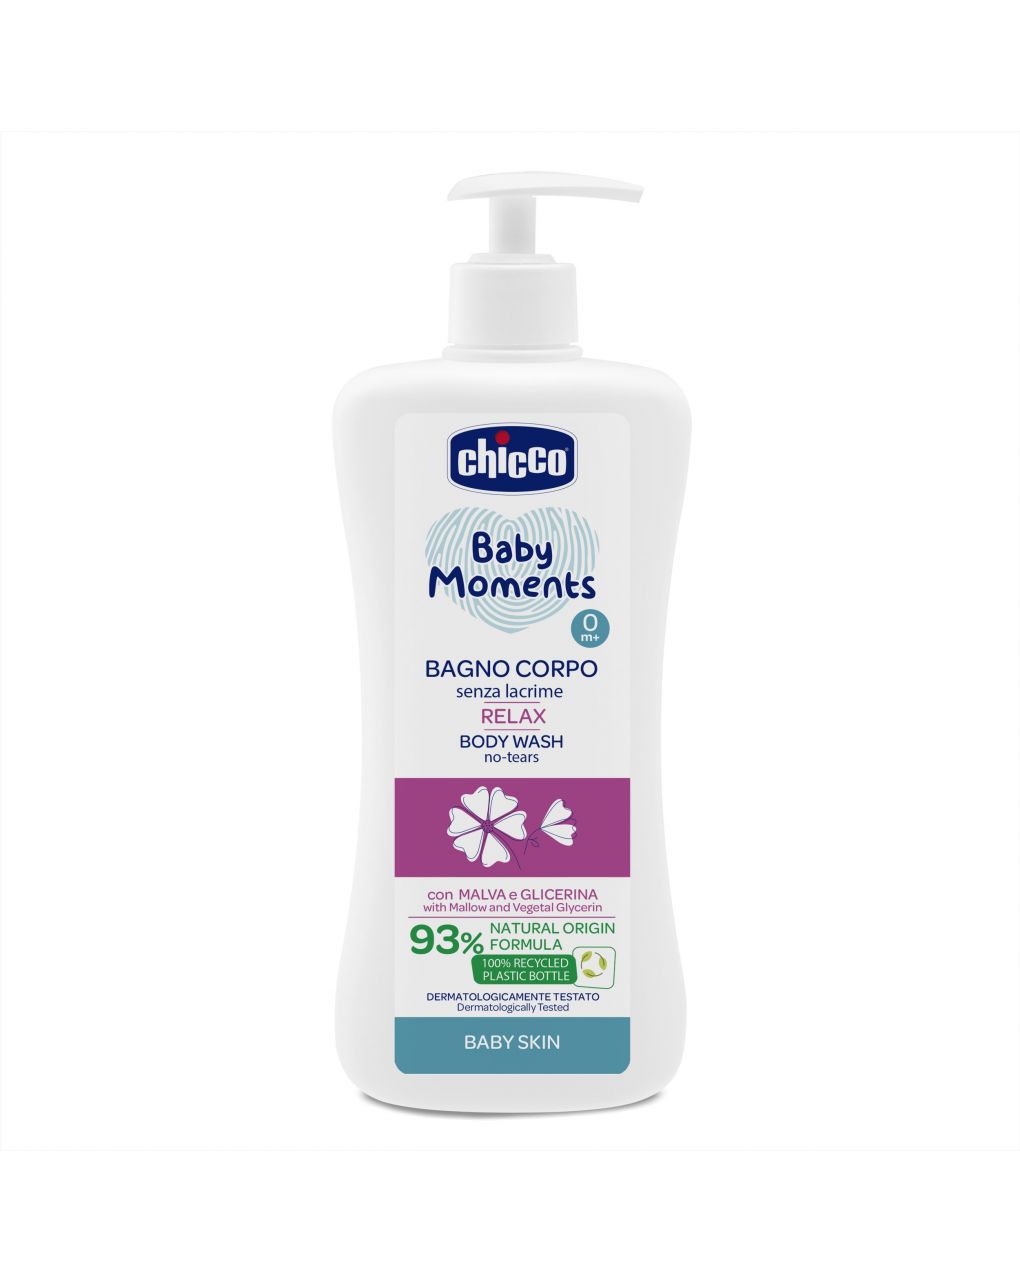 Bagno corpo relax baby moments chicco baby skin